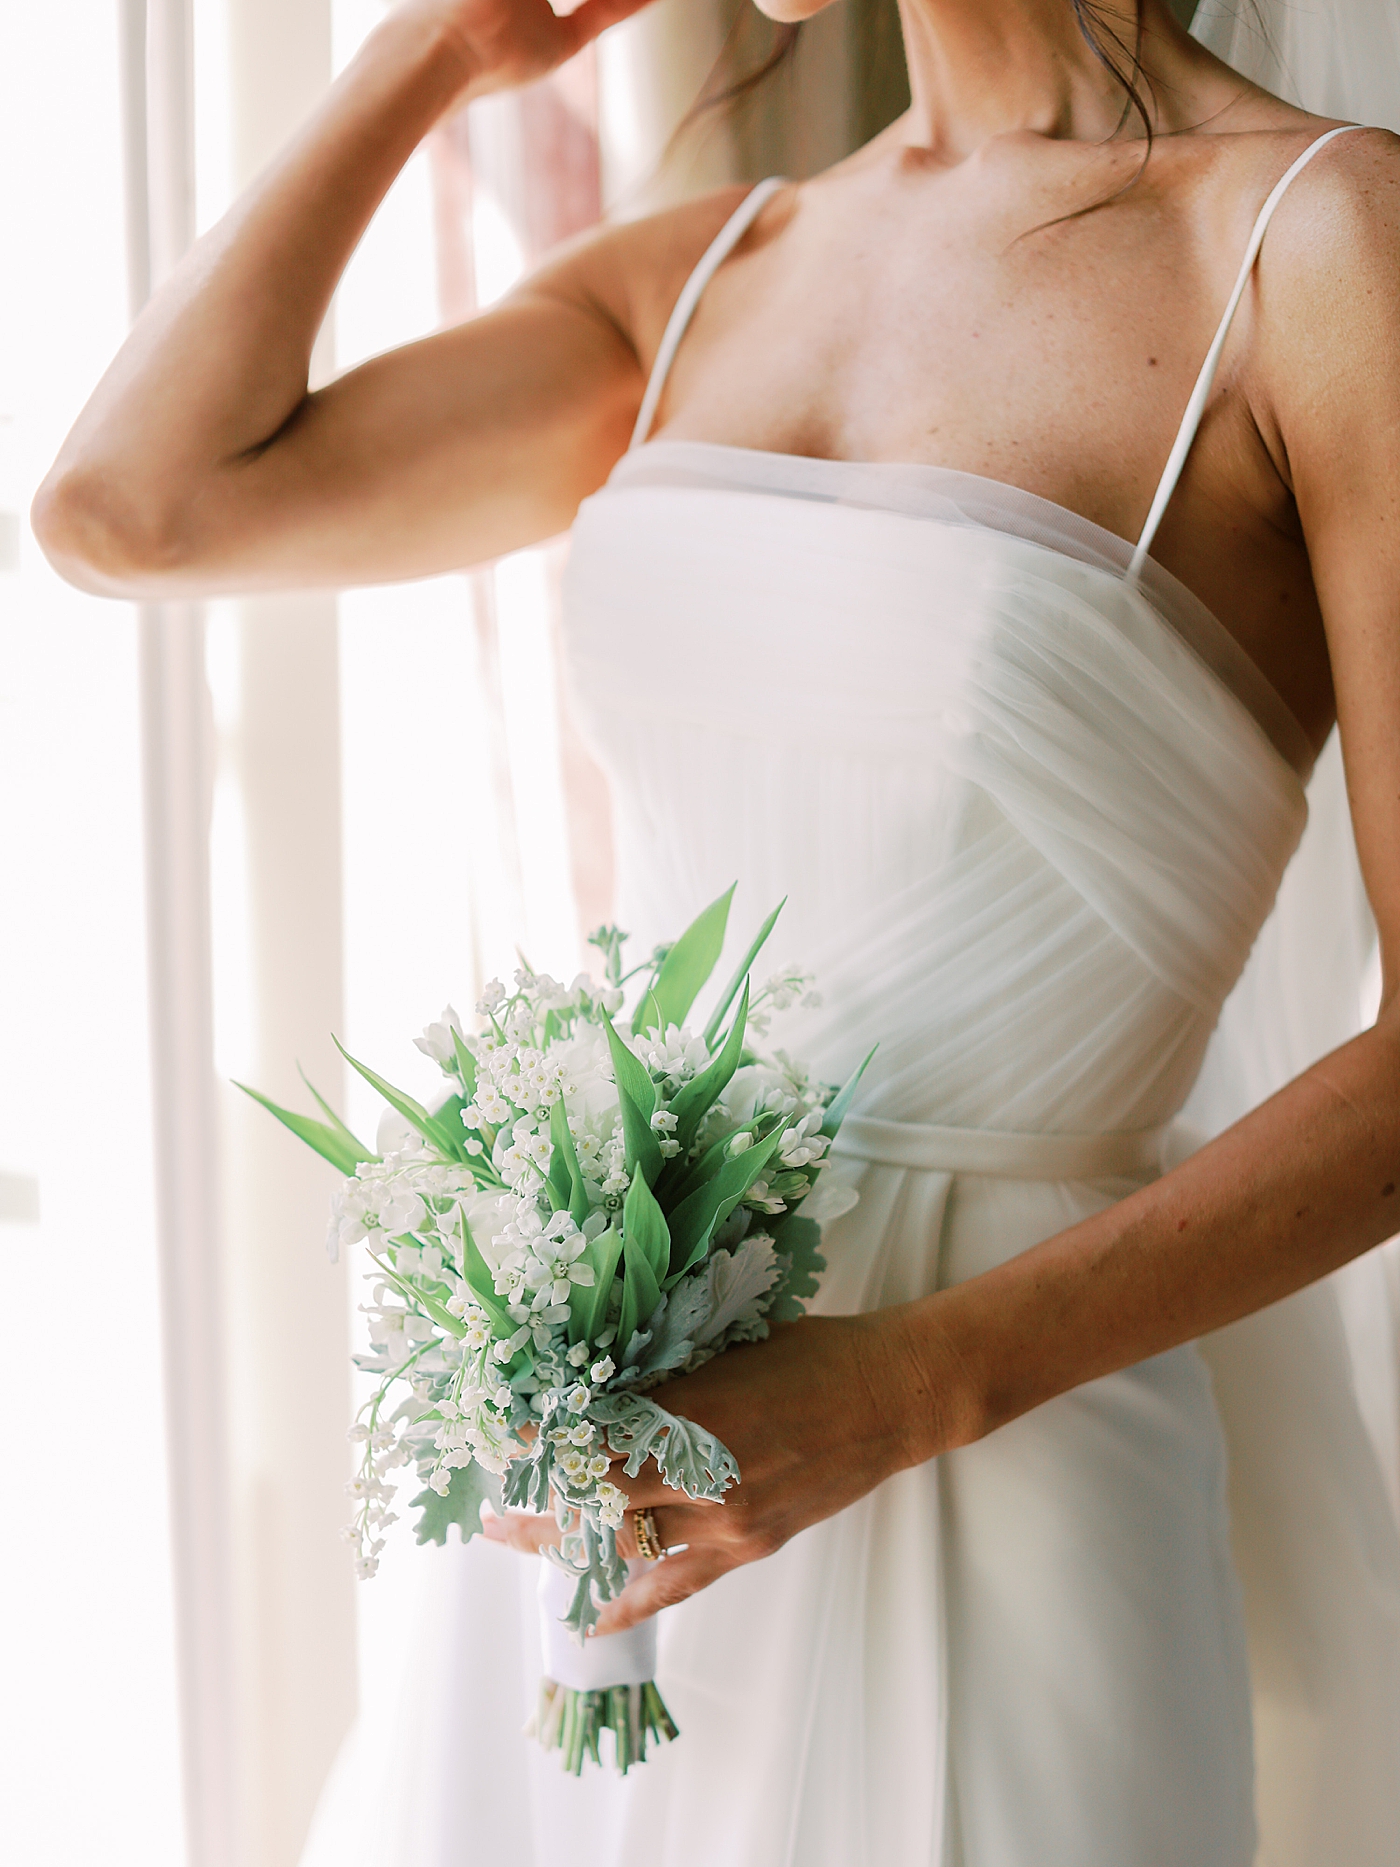 Detail of bridal bouquet held by bride | Image by Diane Sotero Photography